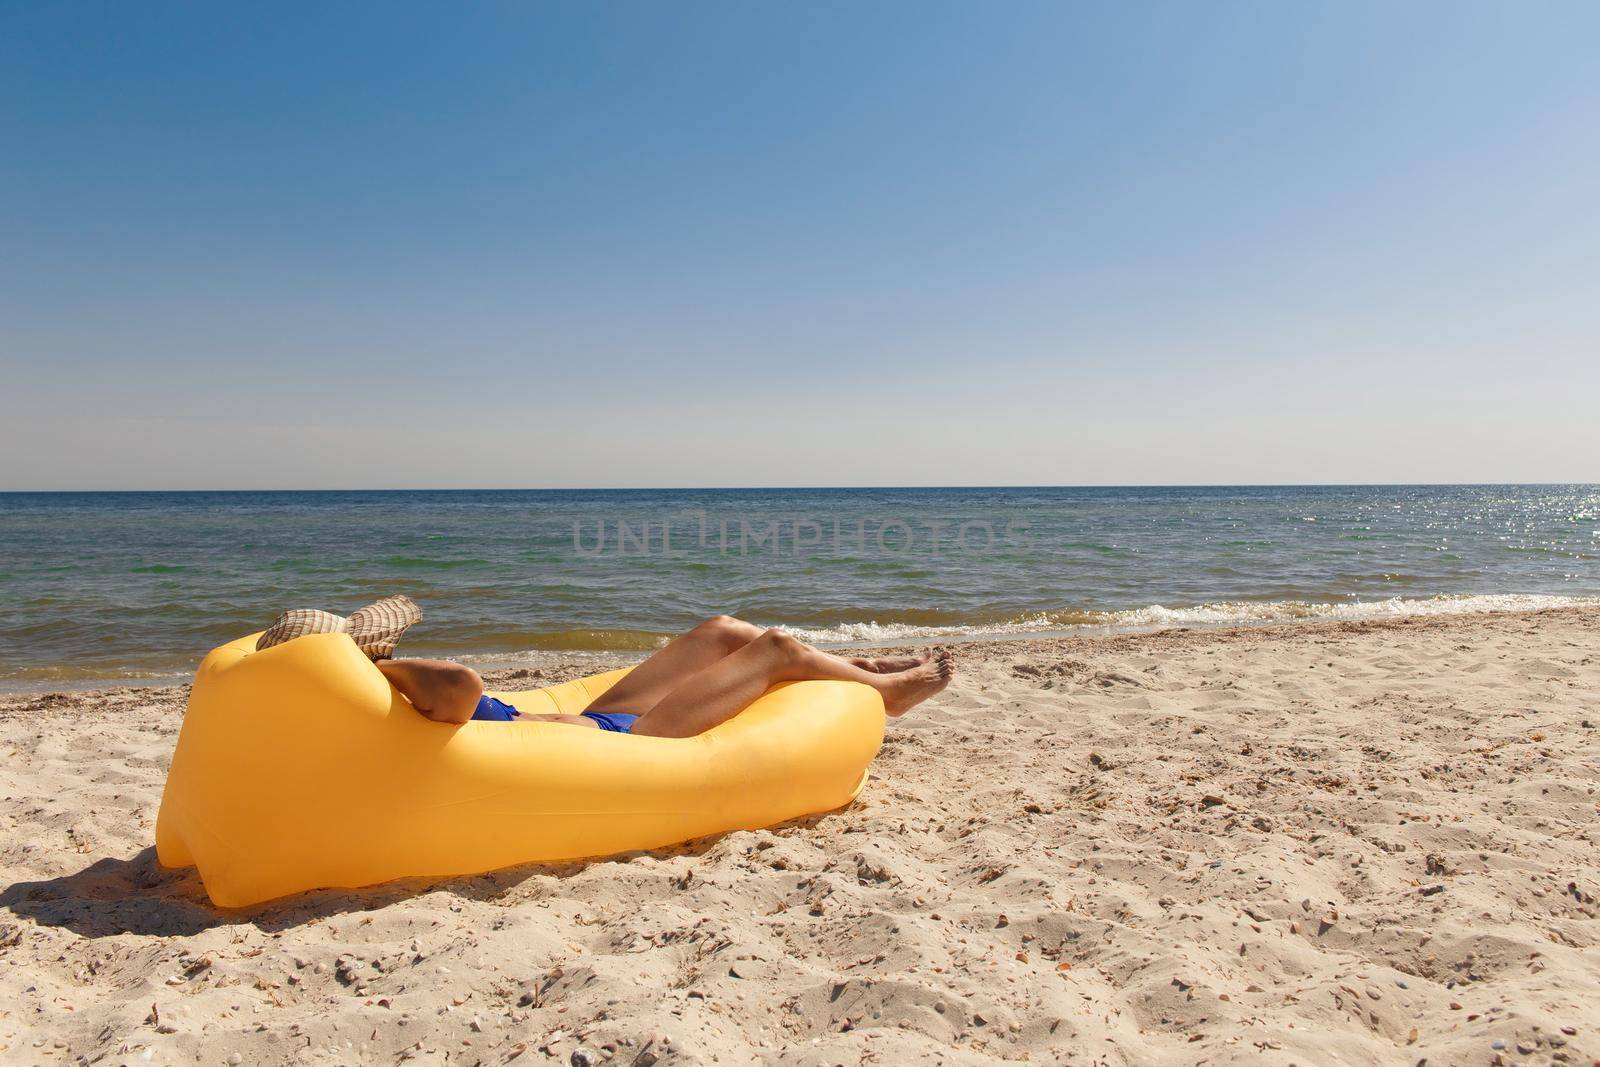 Girl relaxing on lamzac on the beach. Summer holiday idyllic on a tropical island.